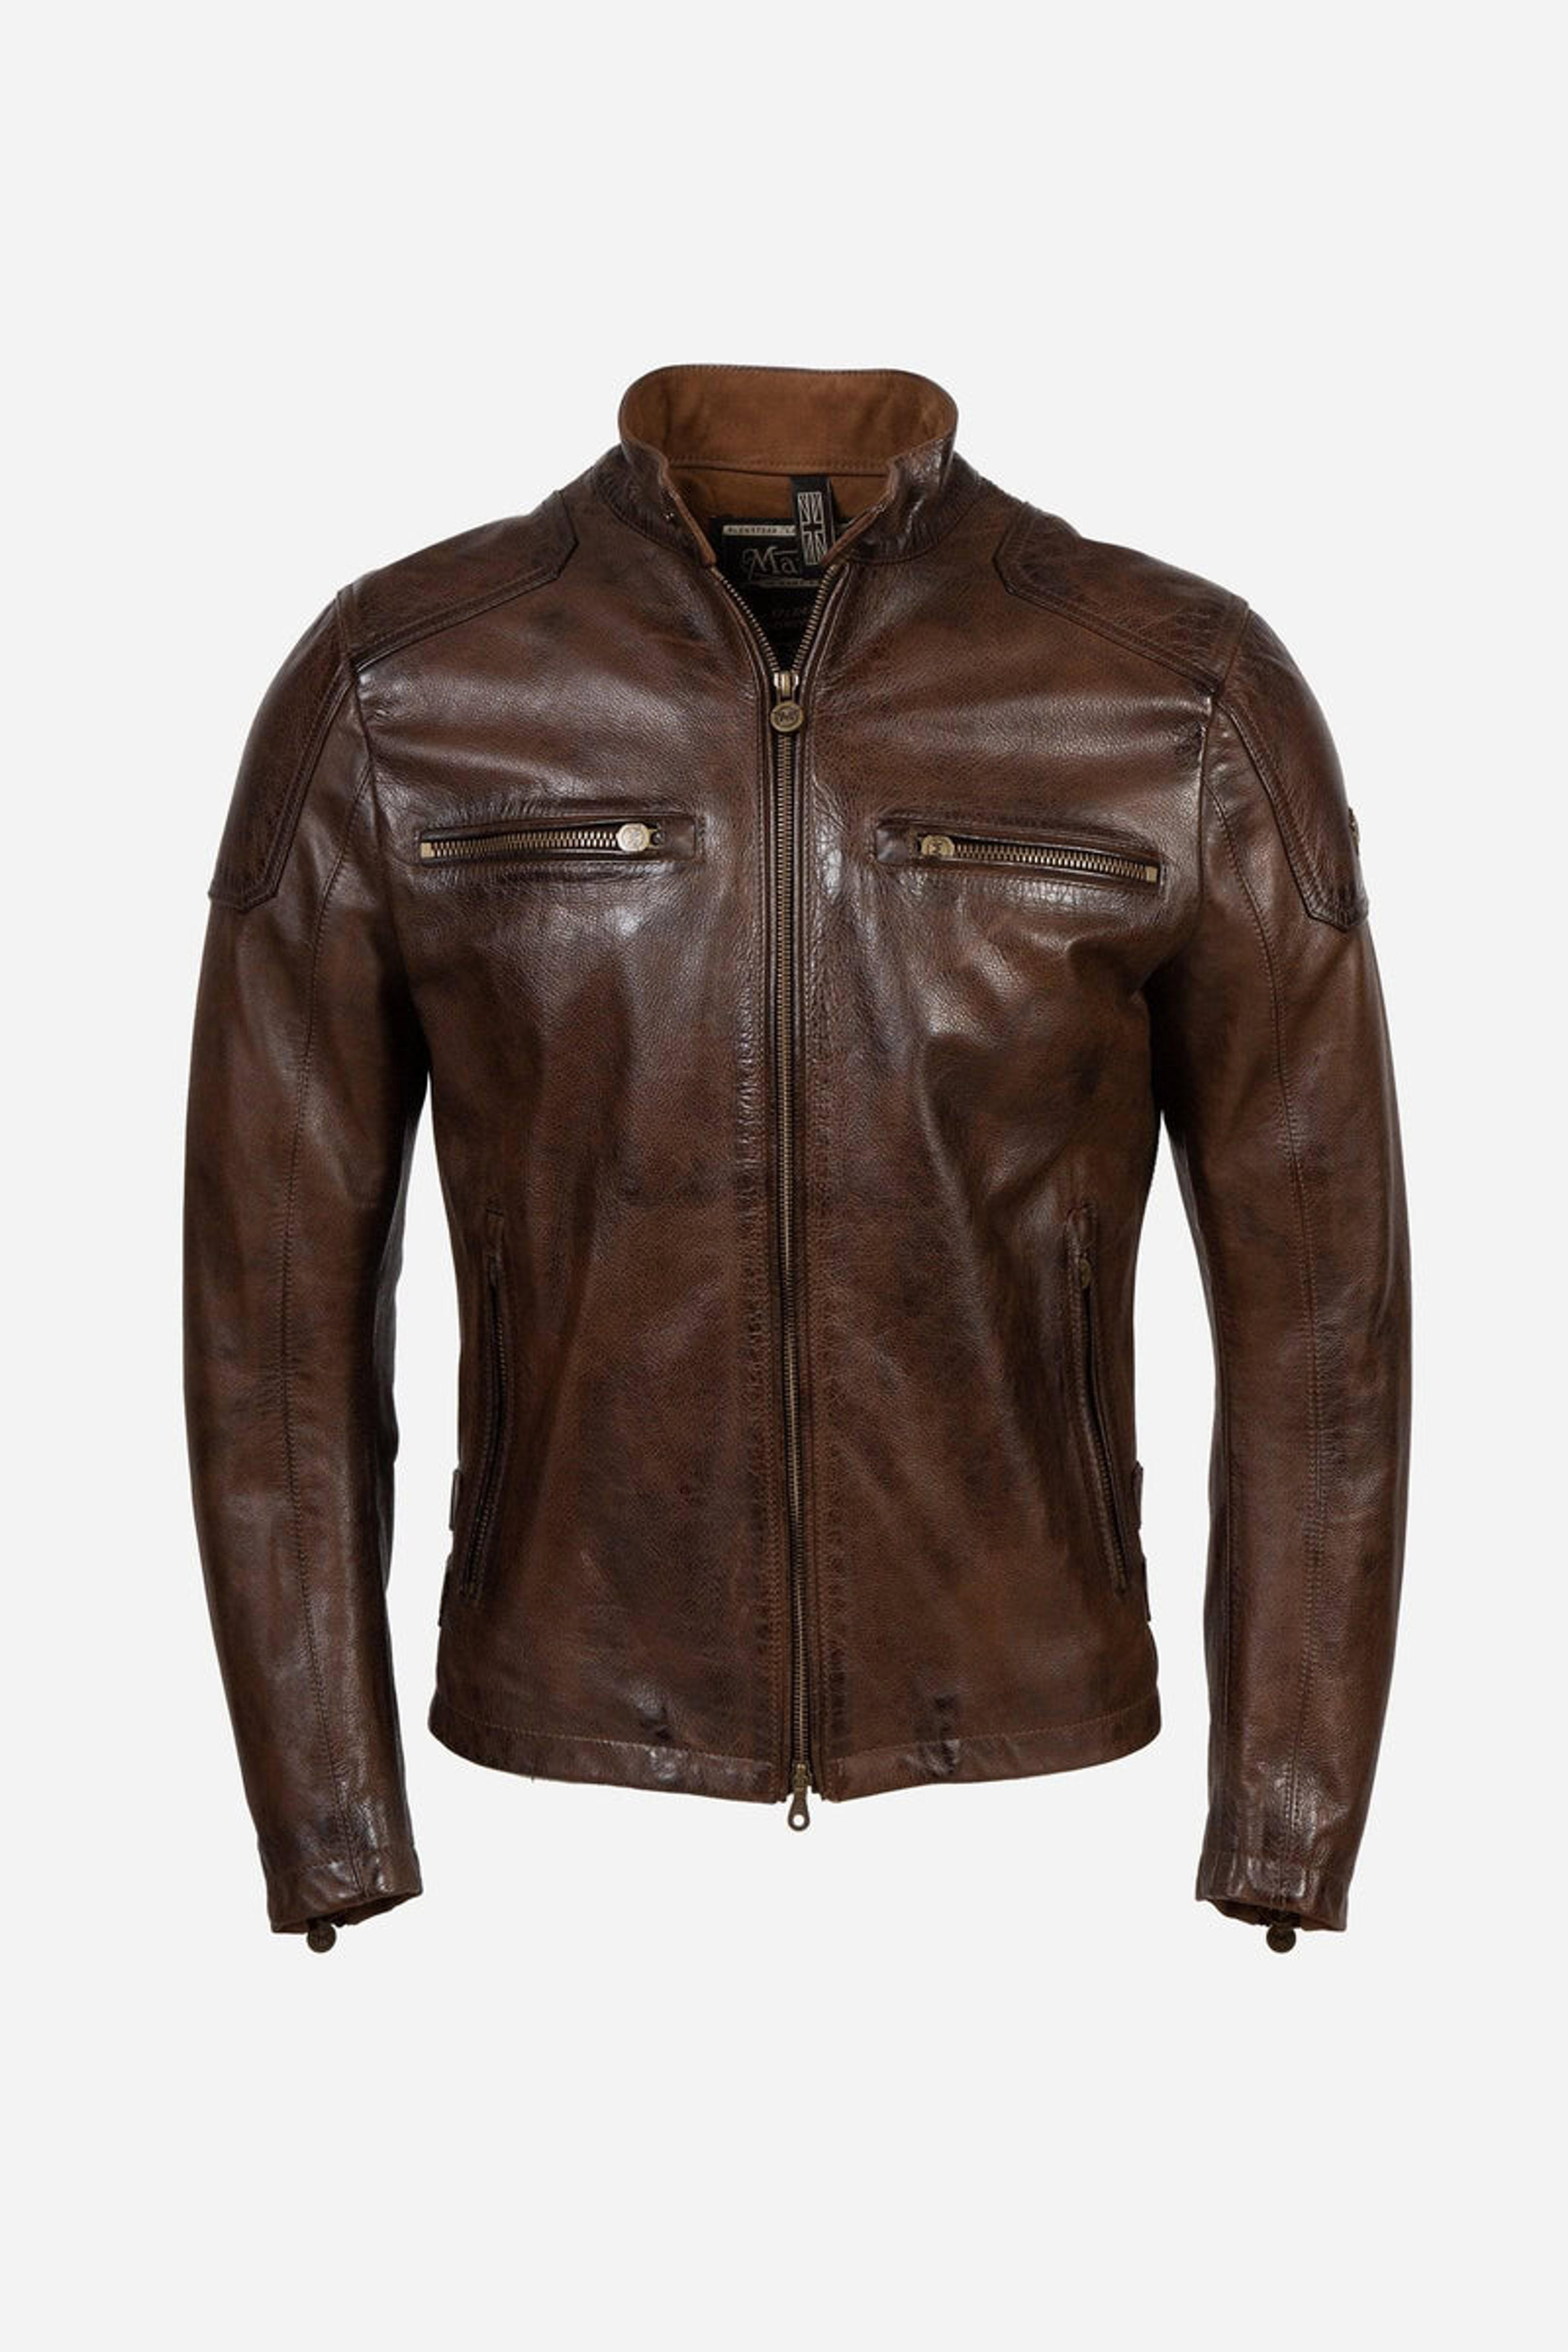 CAPTAIN JACKET LIMITED EDITION | Matchless London